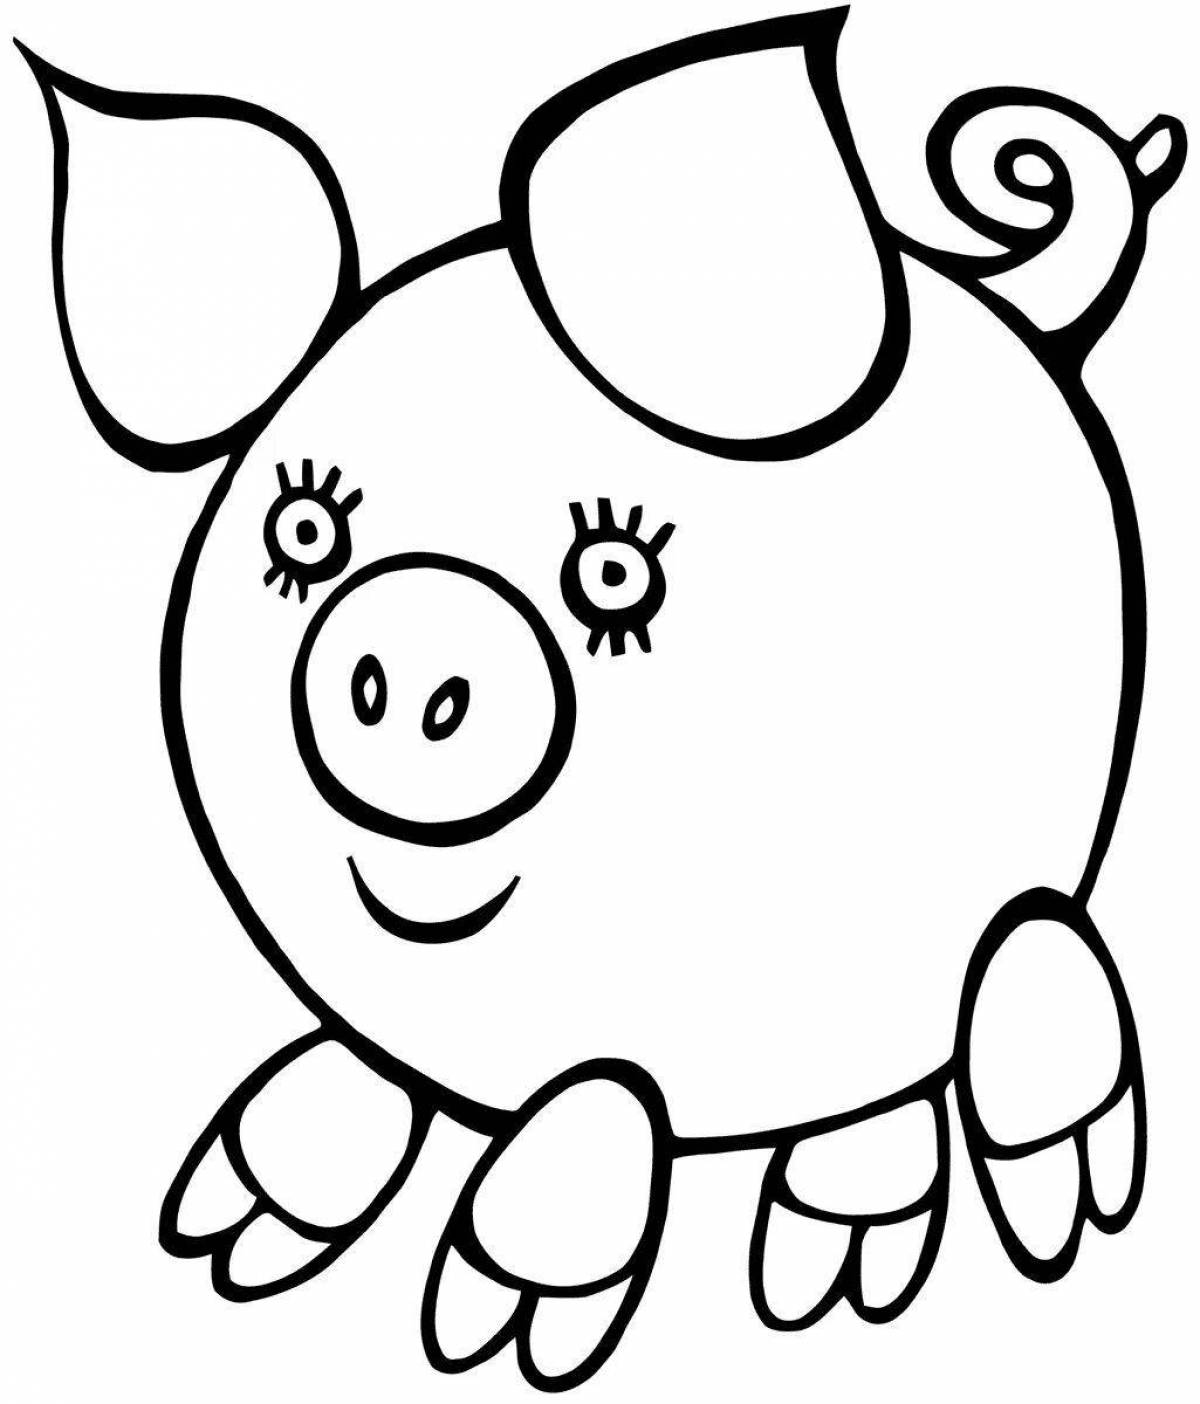 Amazing coloring pages for girls, large